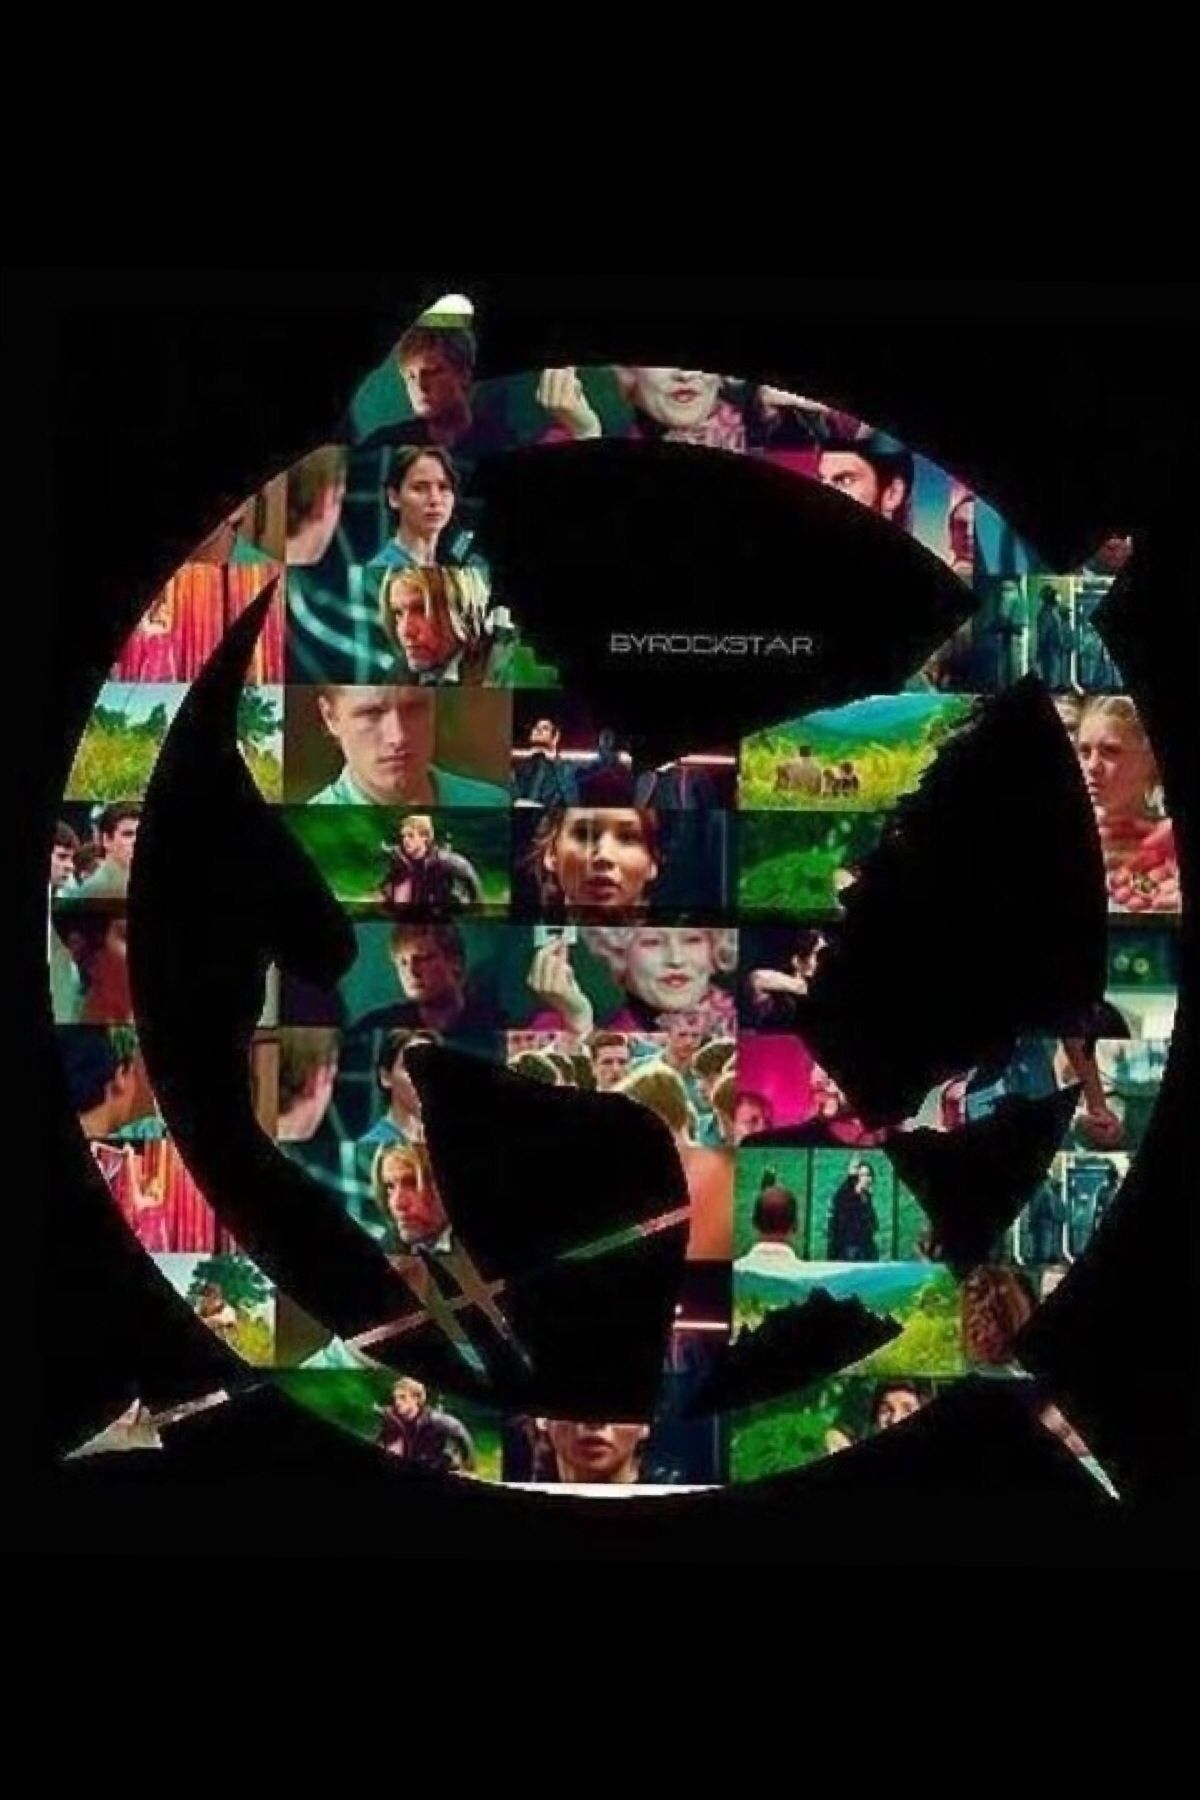 Hunger Games Iphone Wallpapers